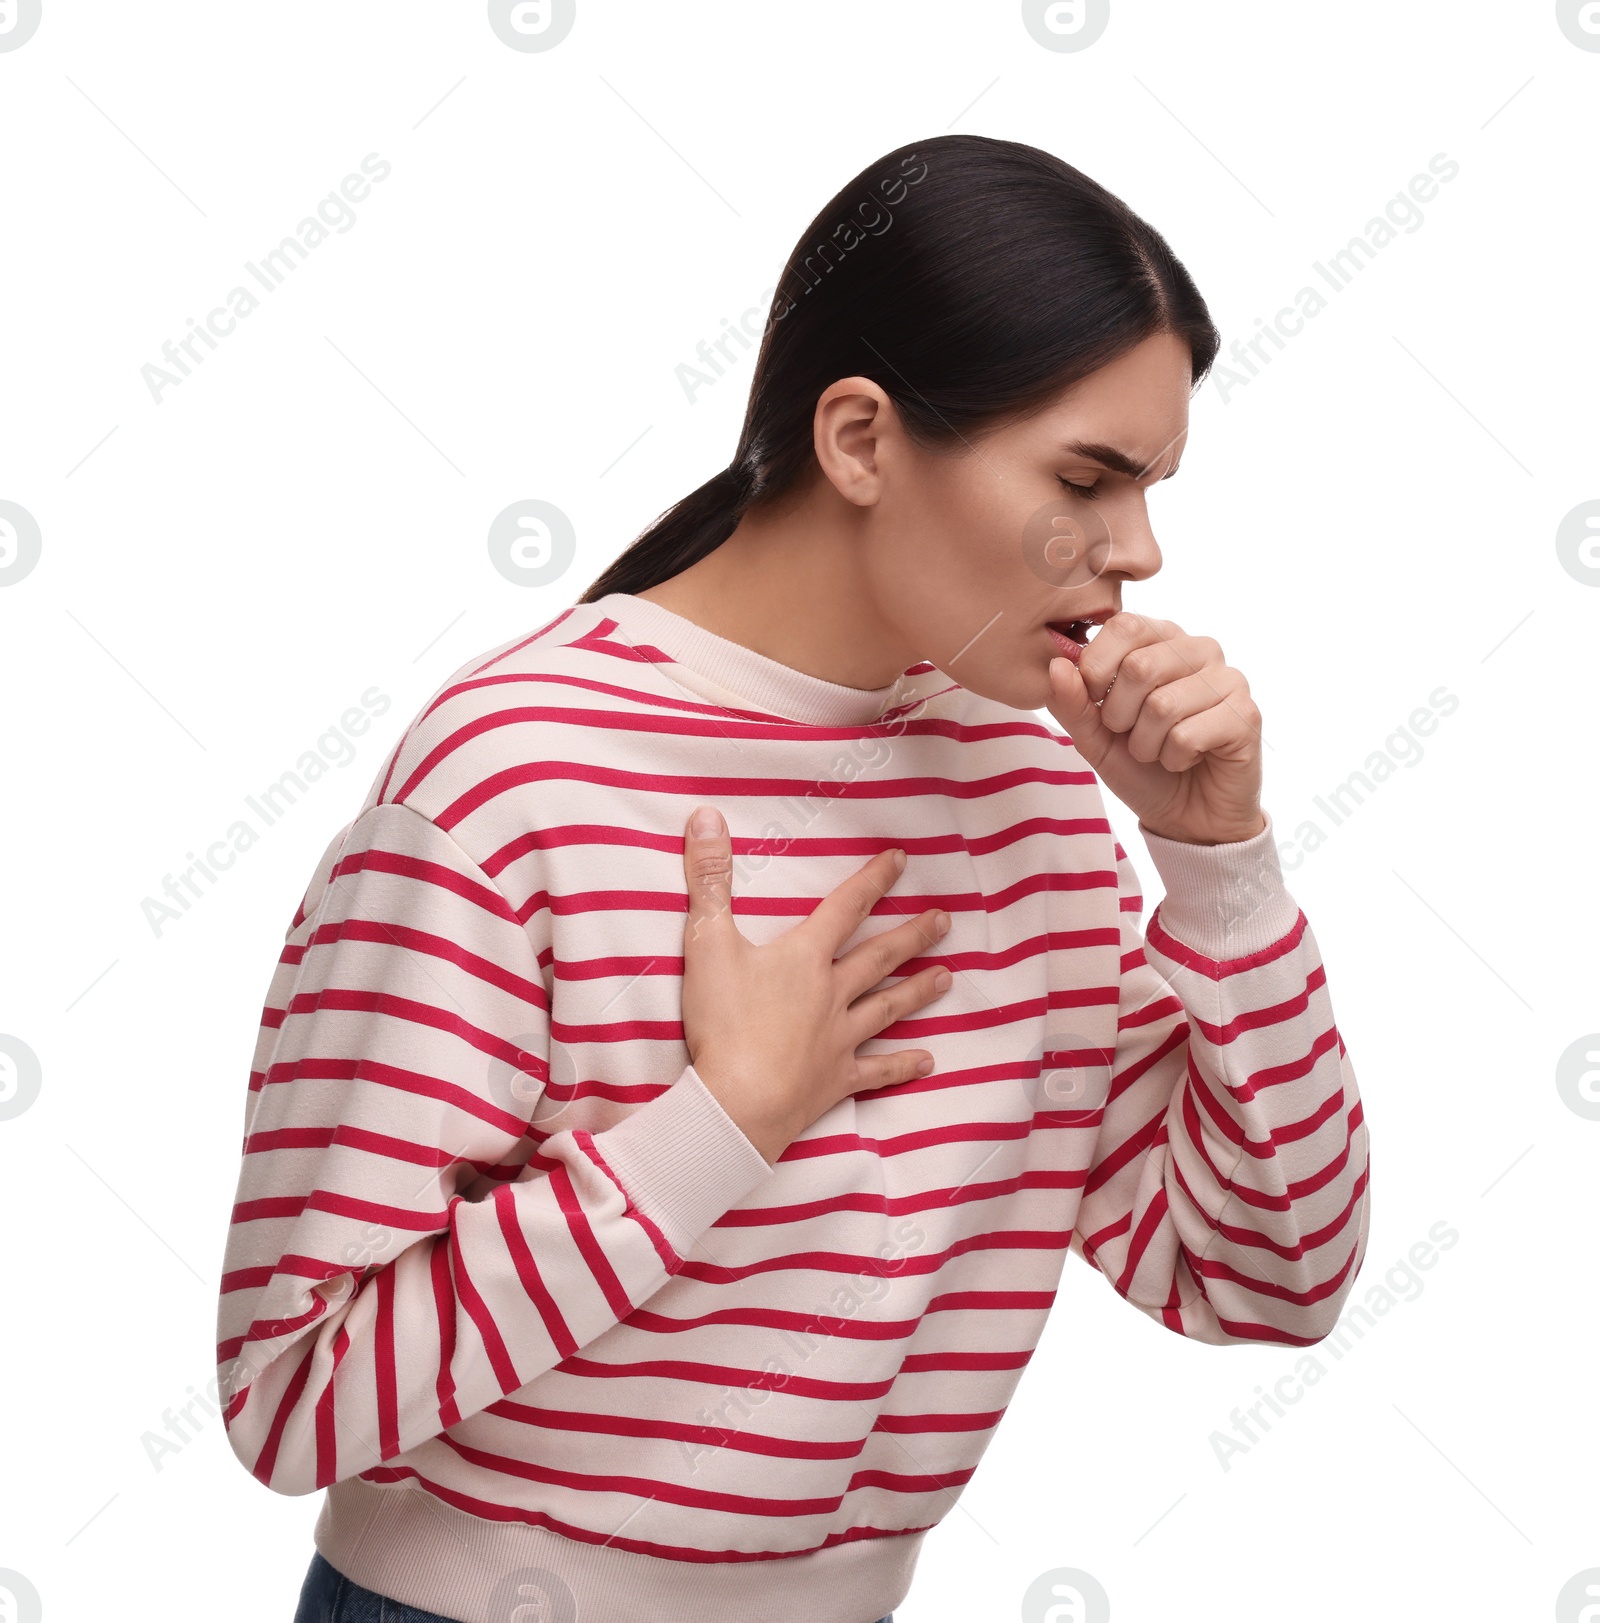 Photo of Woman coughing on white background. Cold symptoms